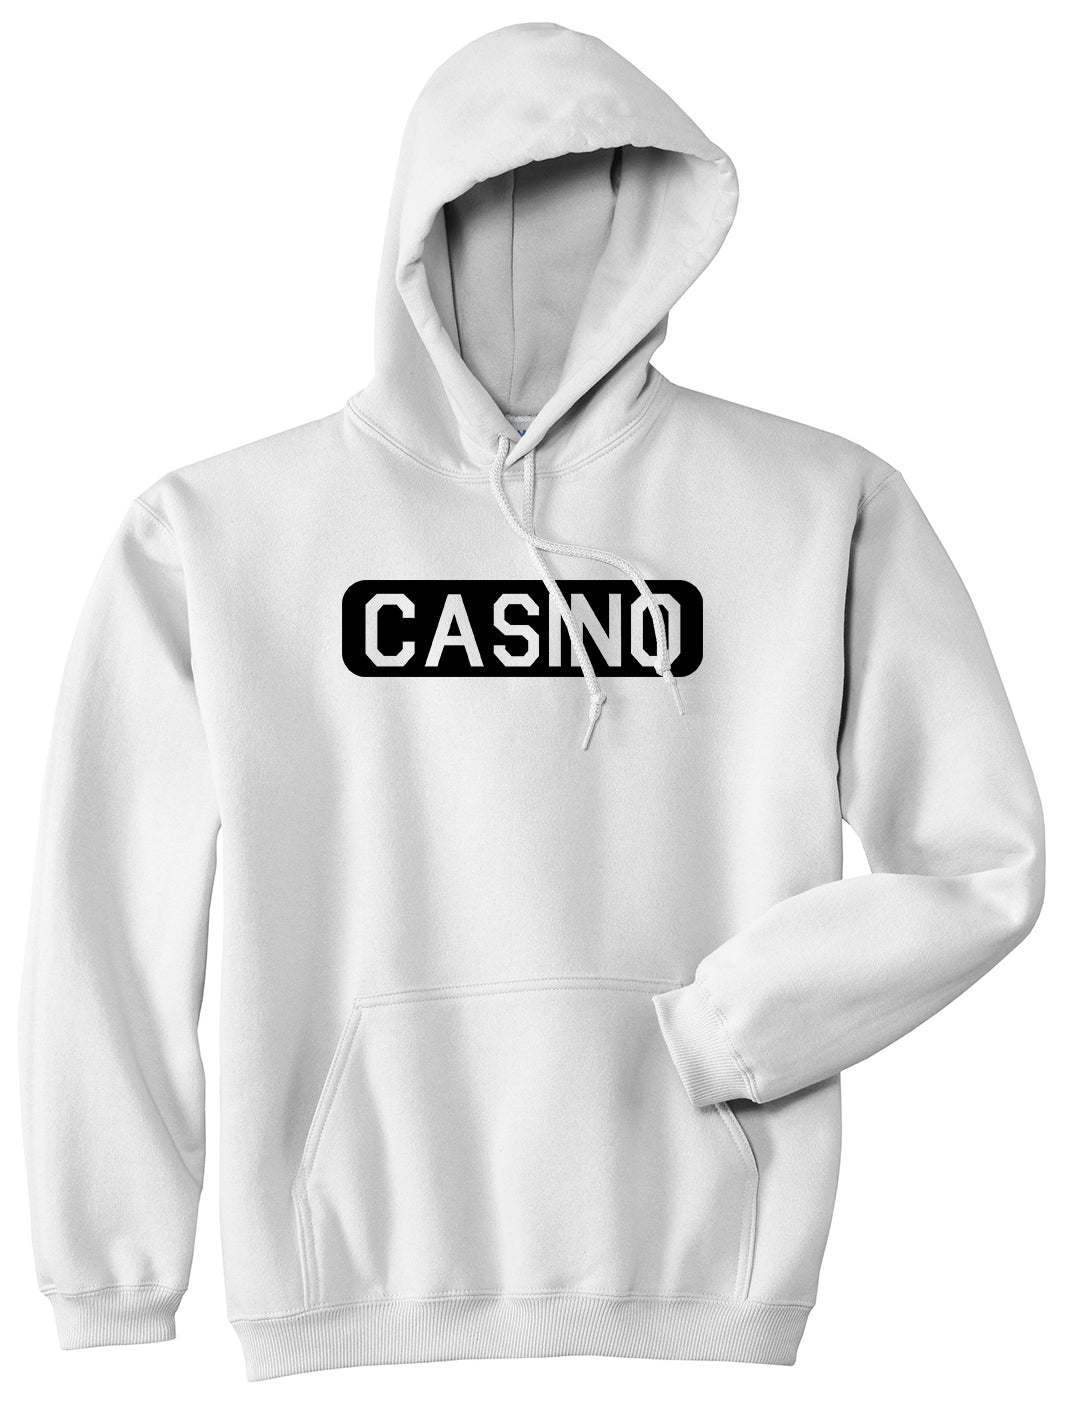 Casino White Pullover Hoodie by Kings Of NY